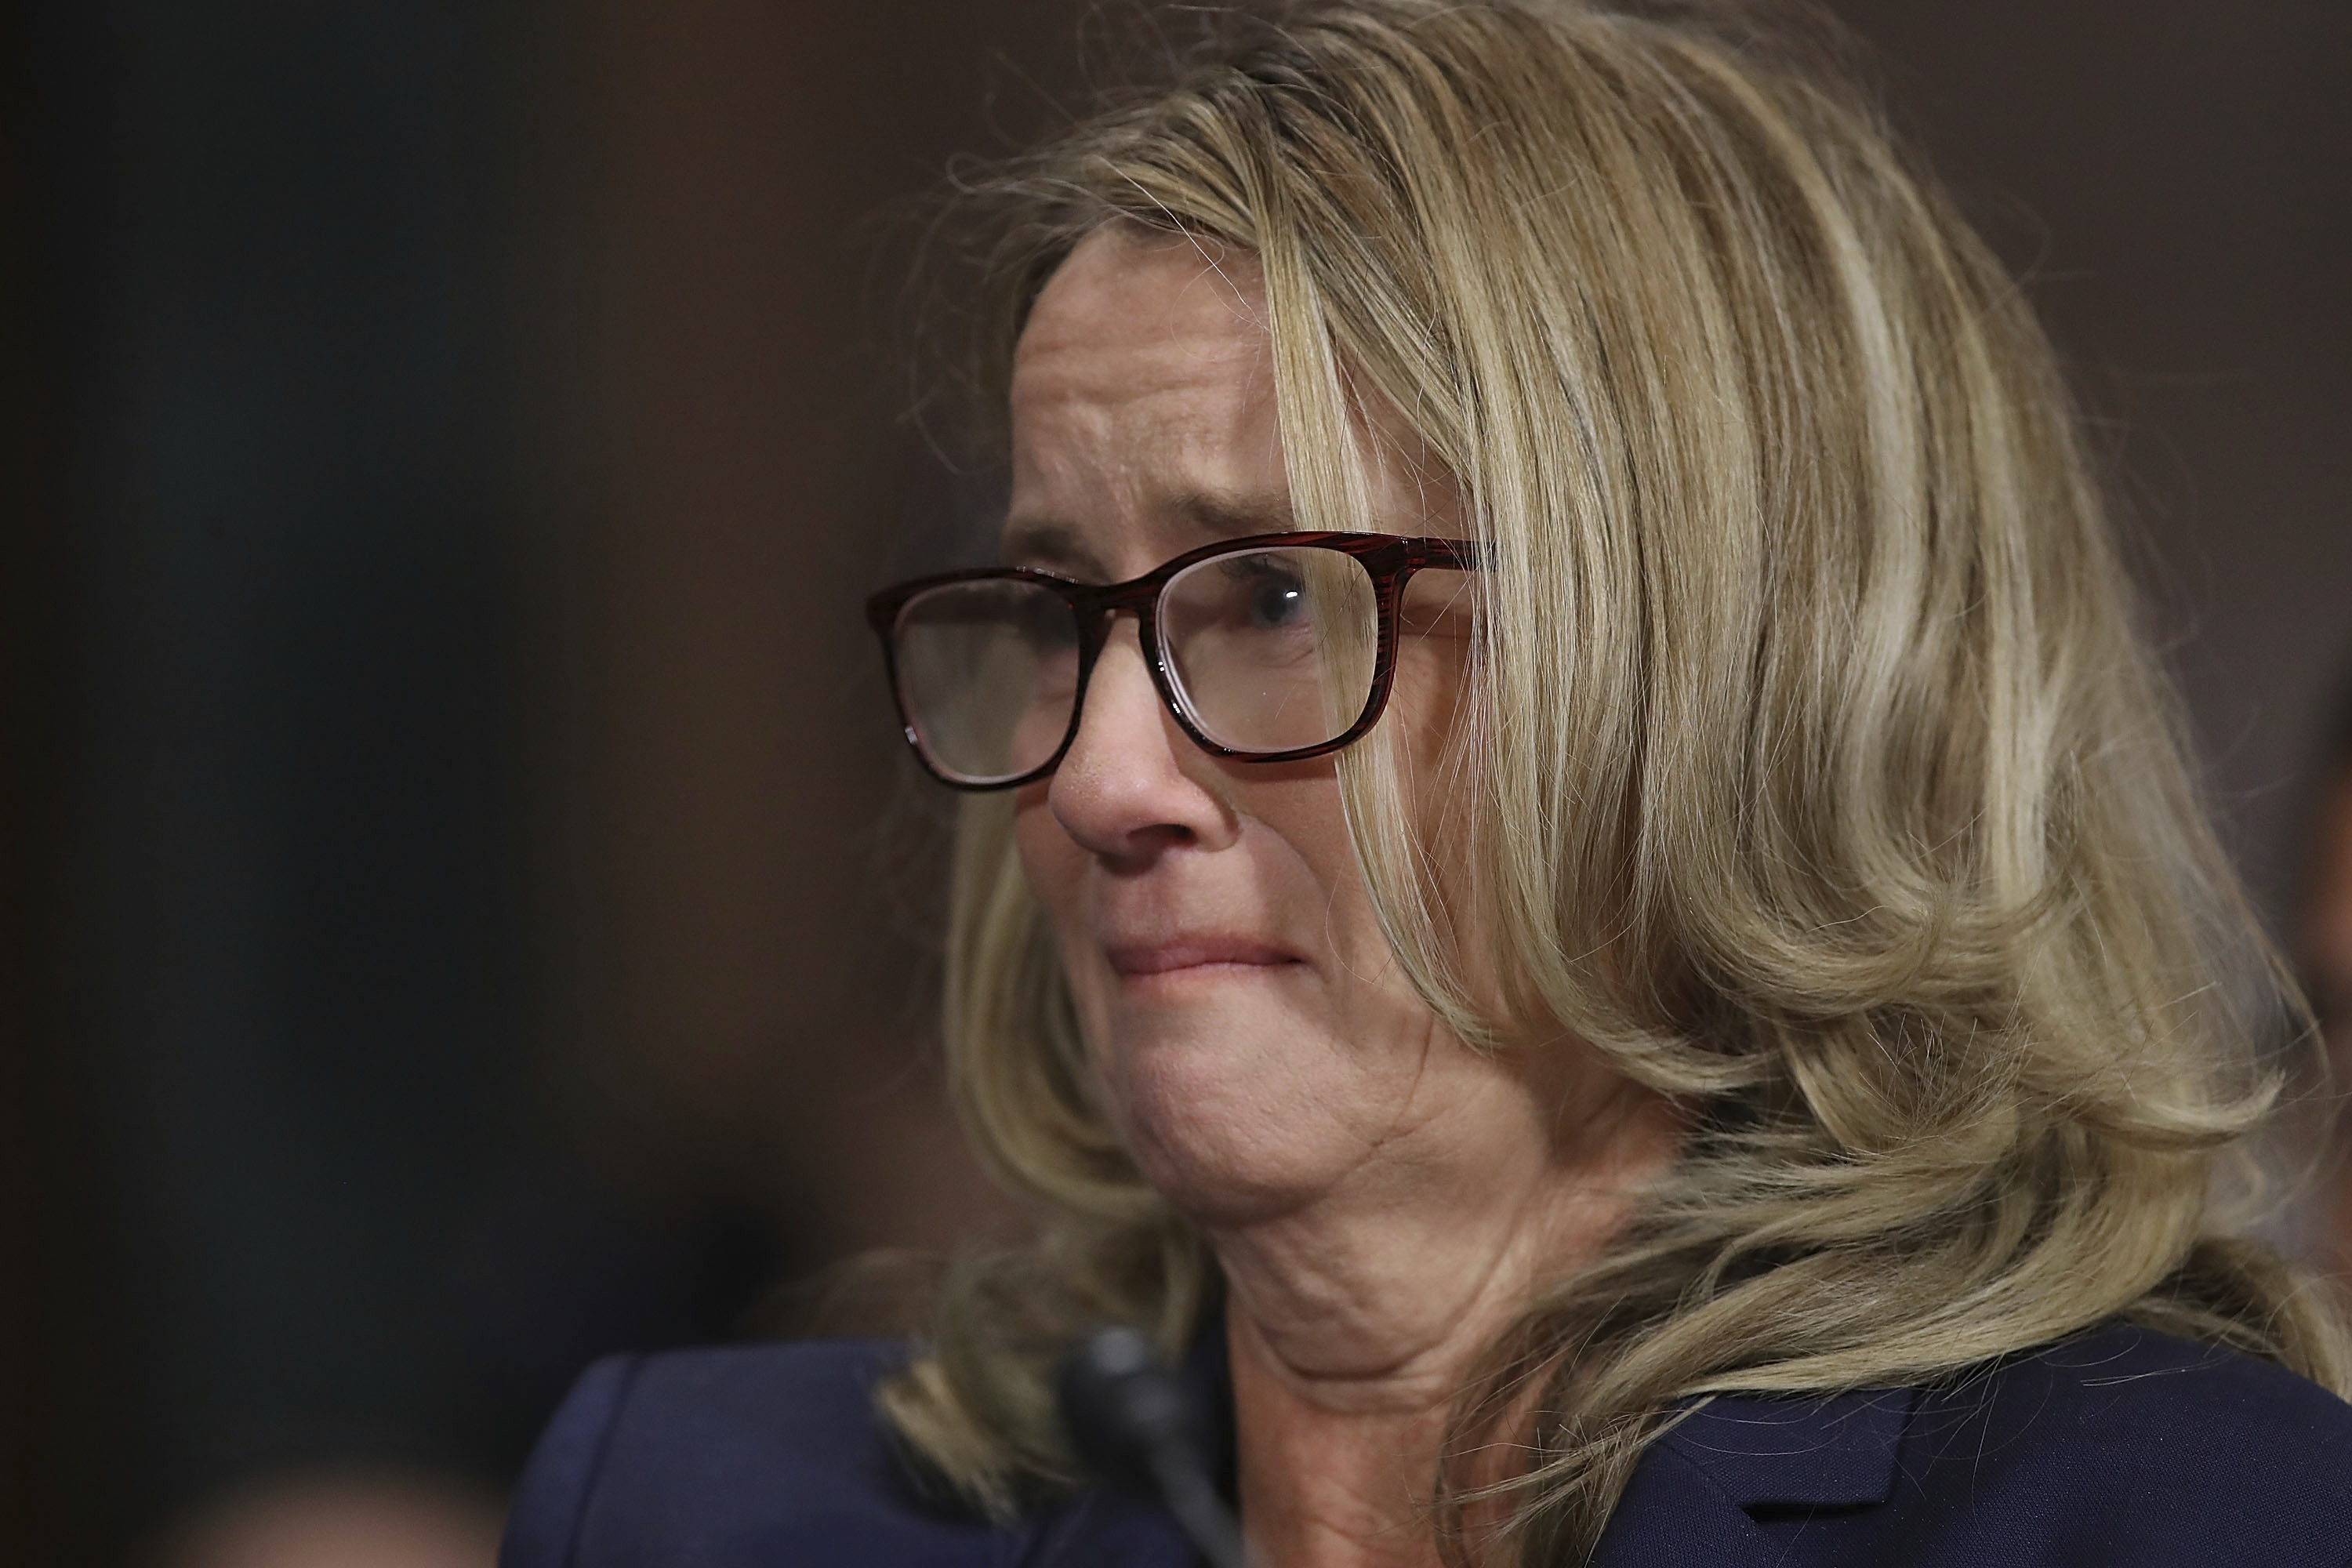 'They were laughing': Ford says her attacker was Kavanaugh